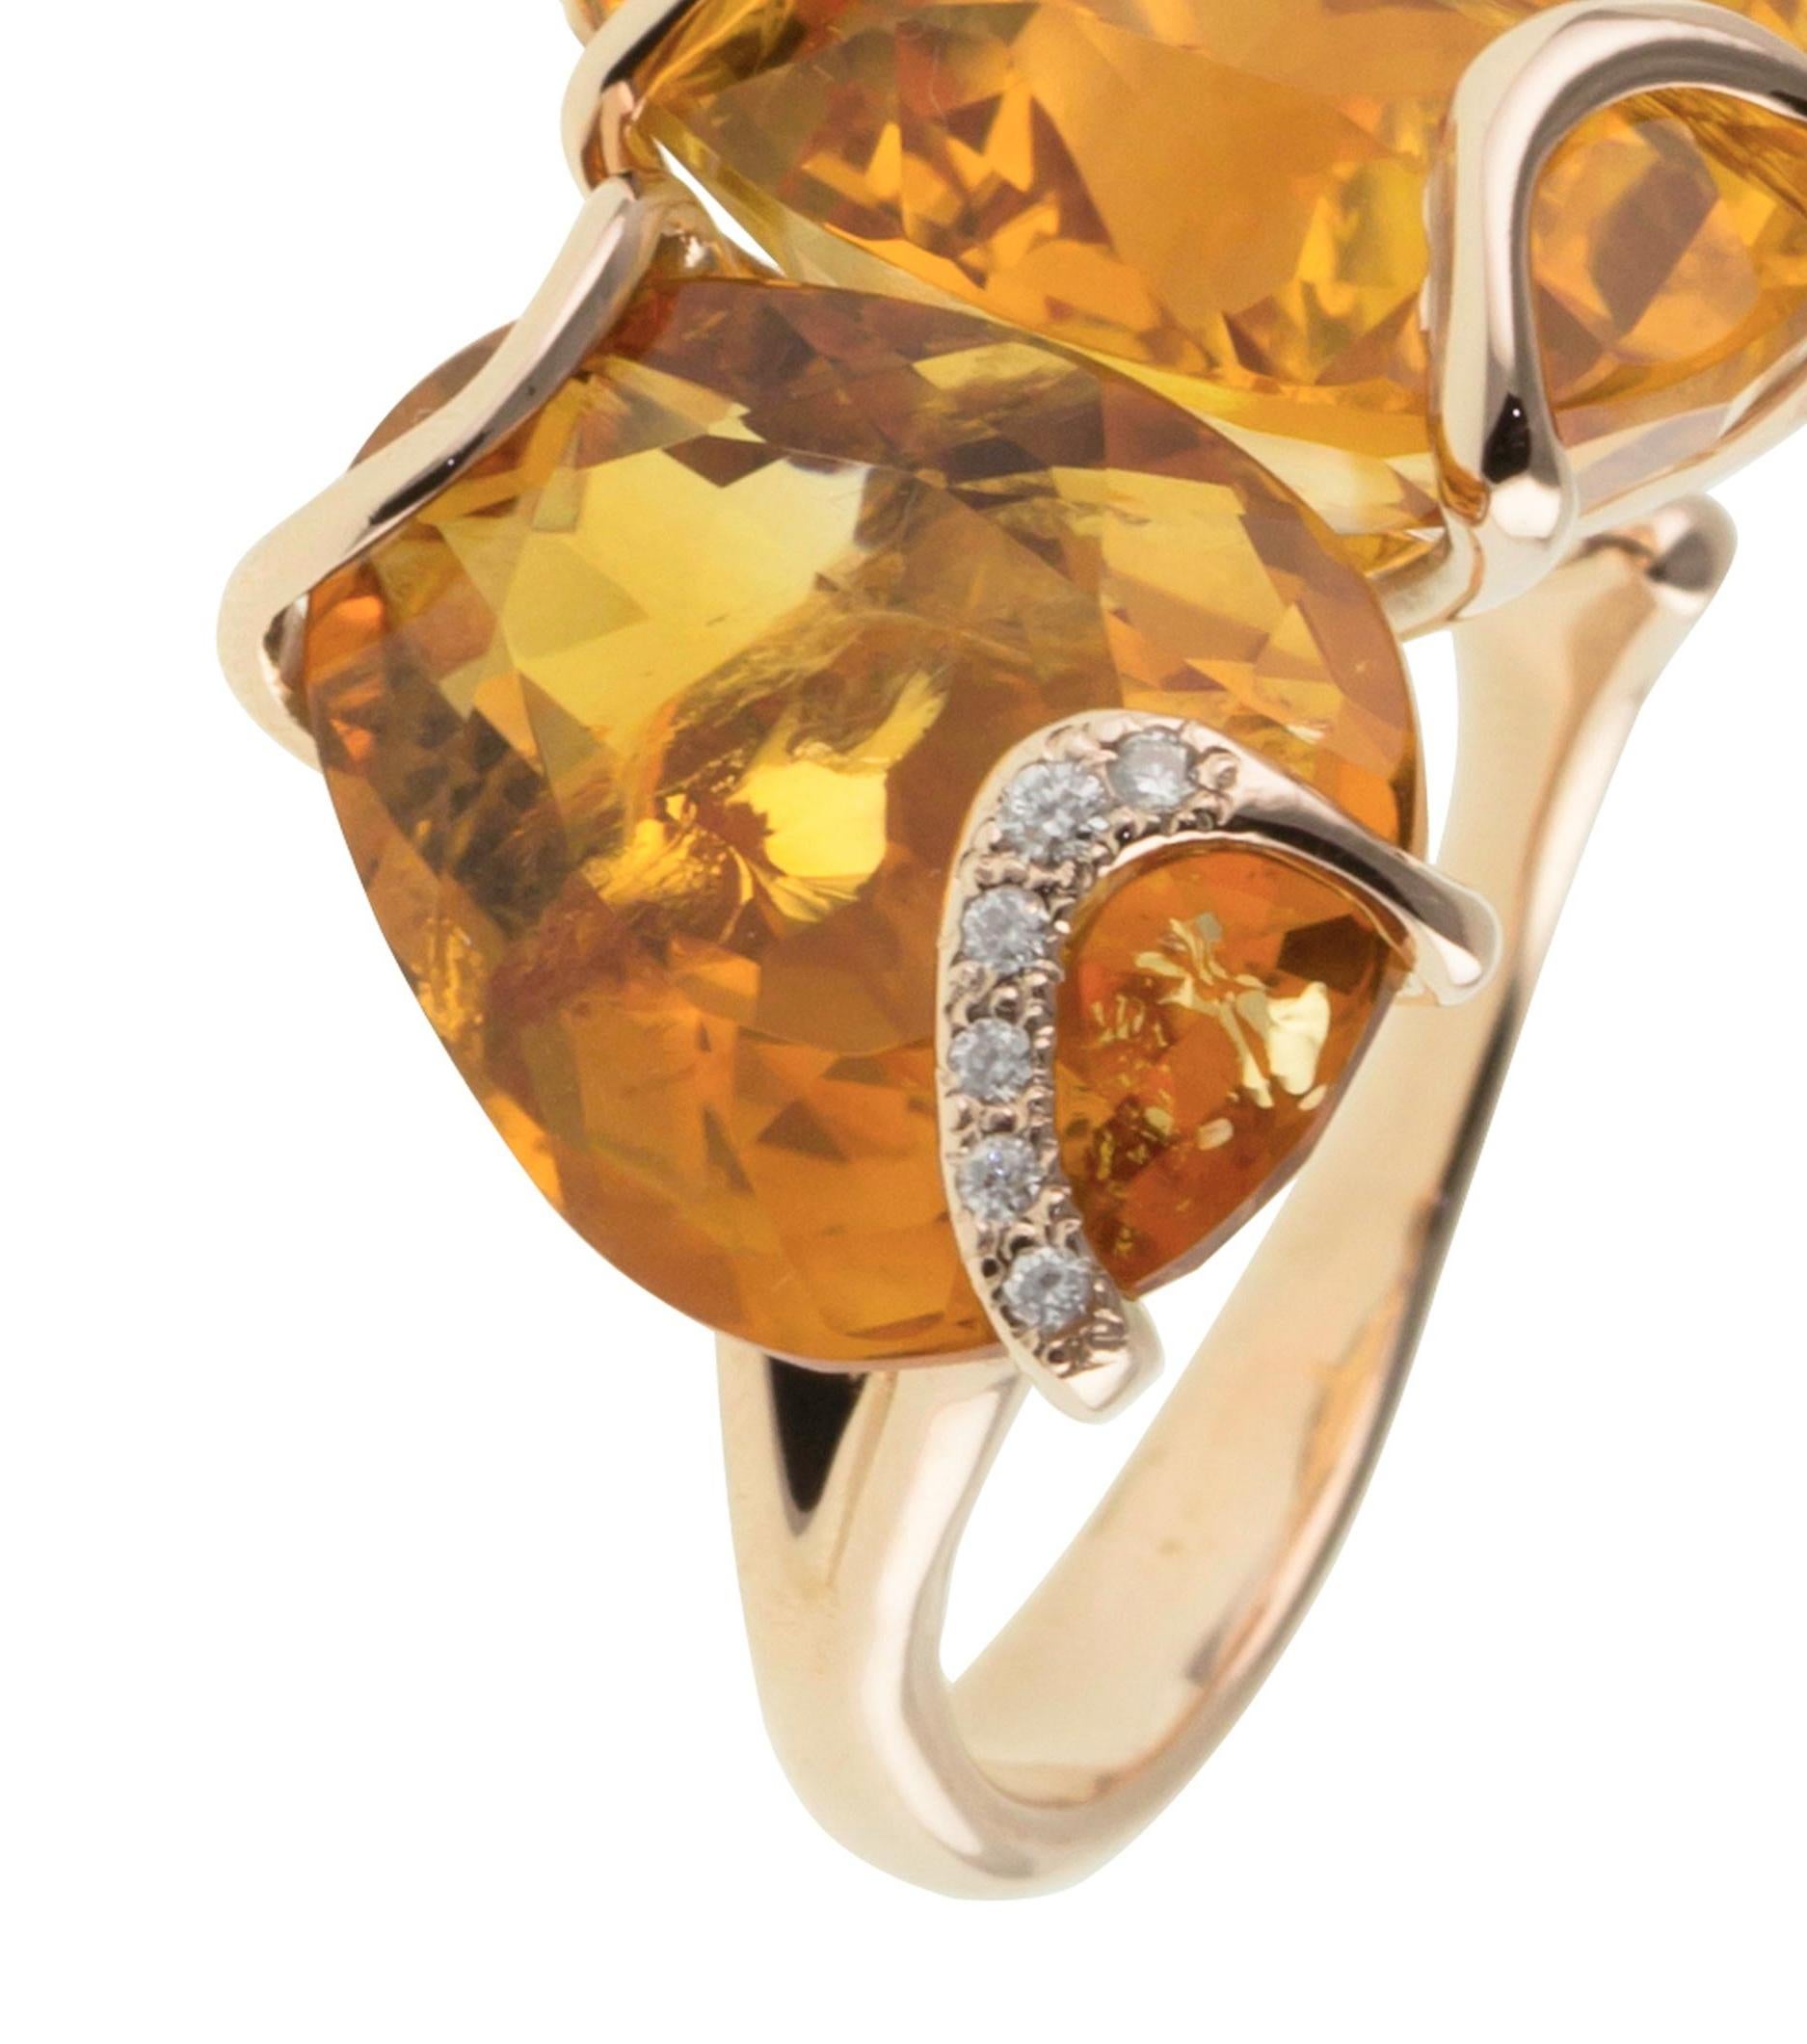 Cocktail Ring in 18Karat Rose Gold gr. 8,10; Round cut Diamond pavè ct. 0,09; Citrine Quartz ct. 22,50; the design is inspired from a Crocus flower bud that grows from a  branch tree